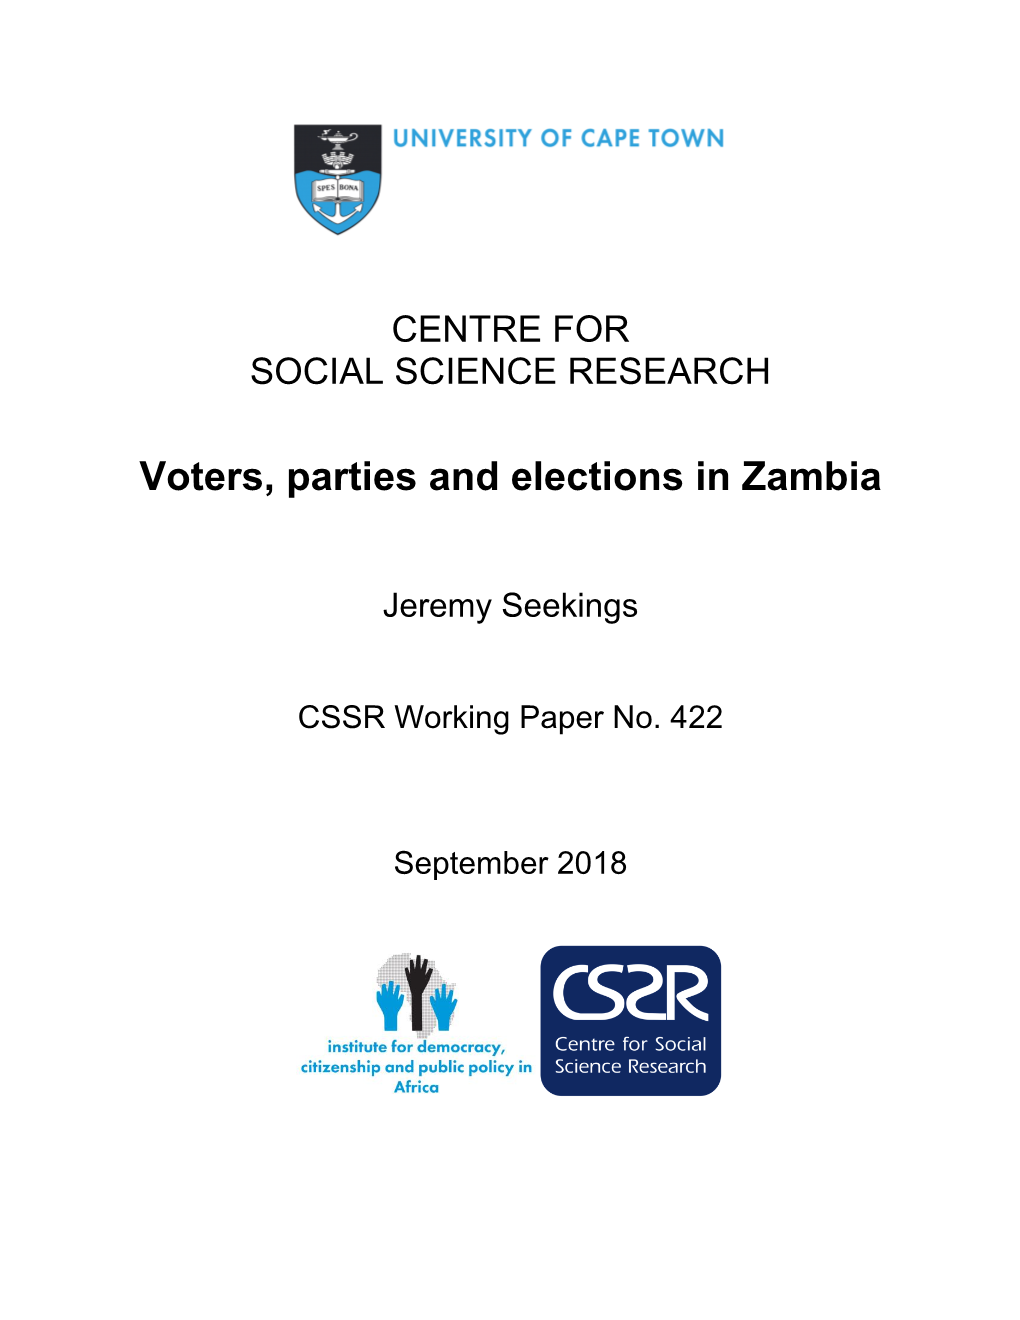 Voters, Parties and Elections in Zambia